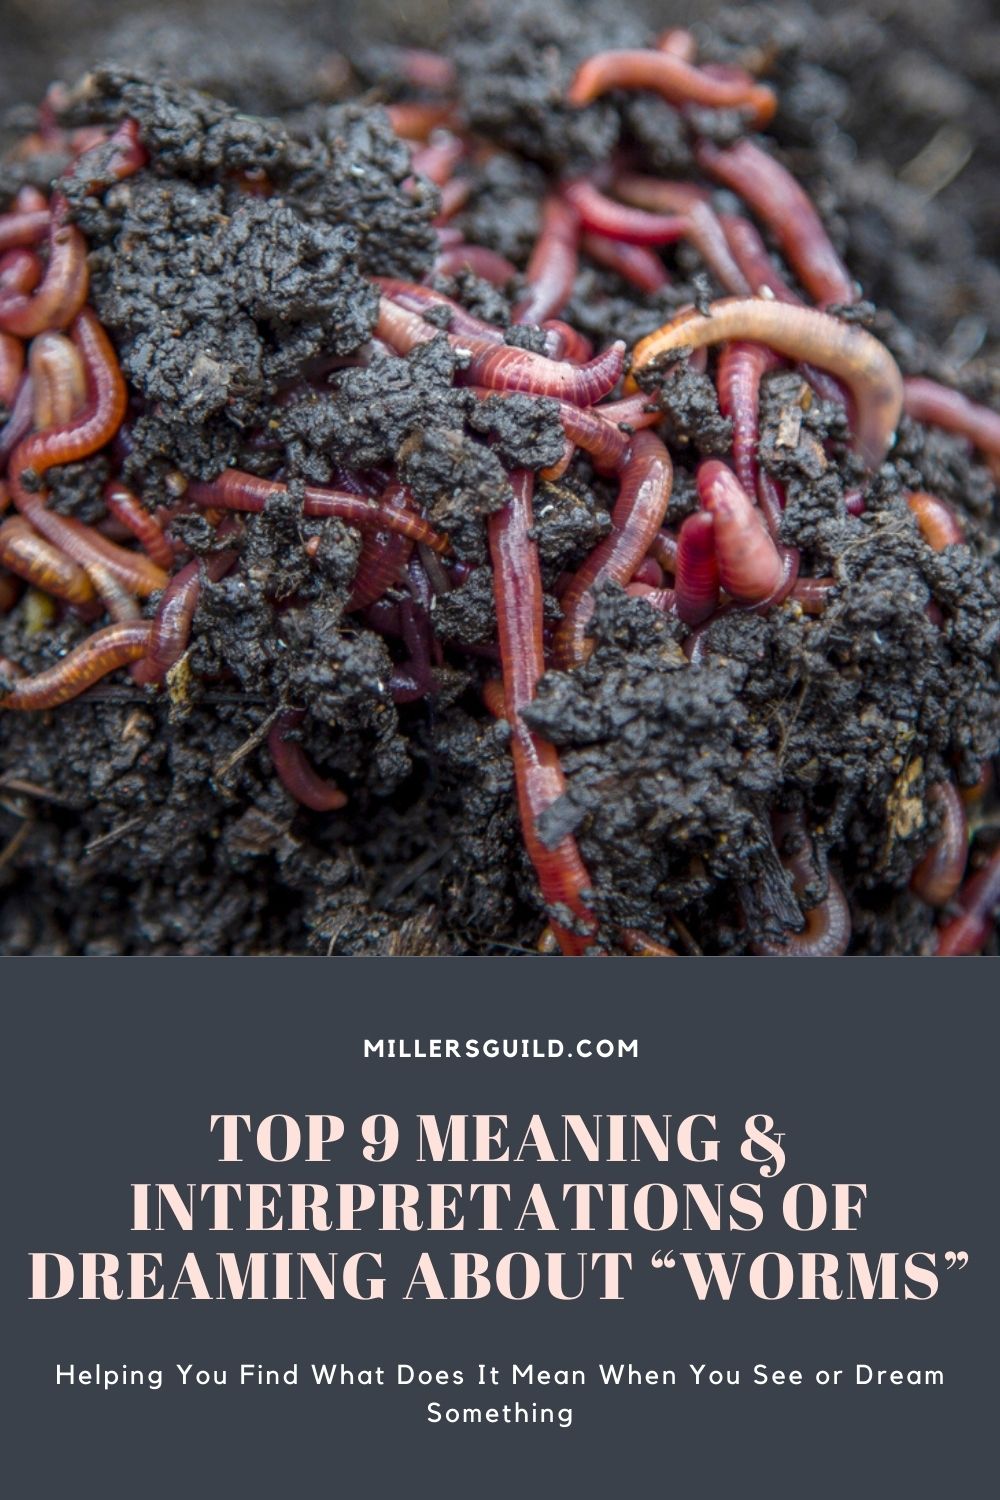 Top 9 Meaning & Interpretations Of Dreaming About "Worms"